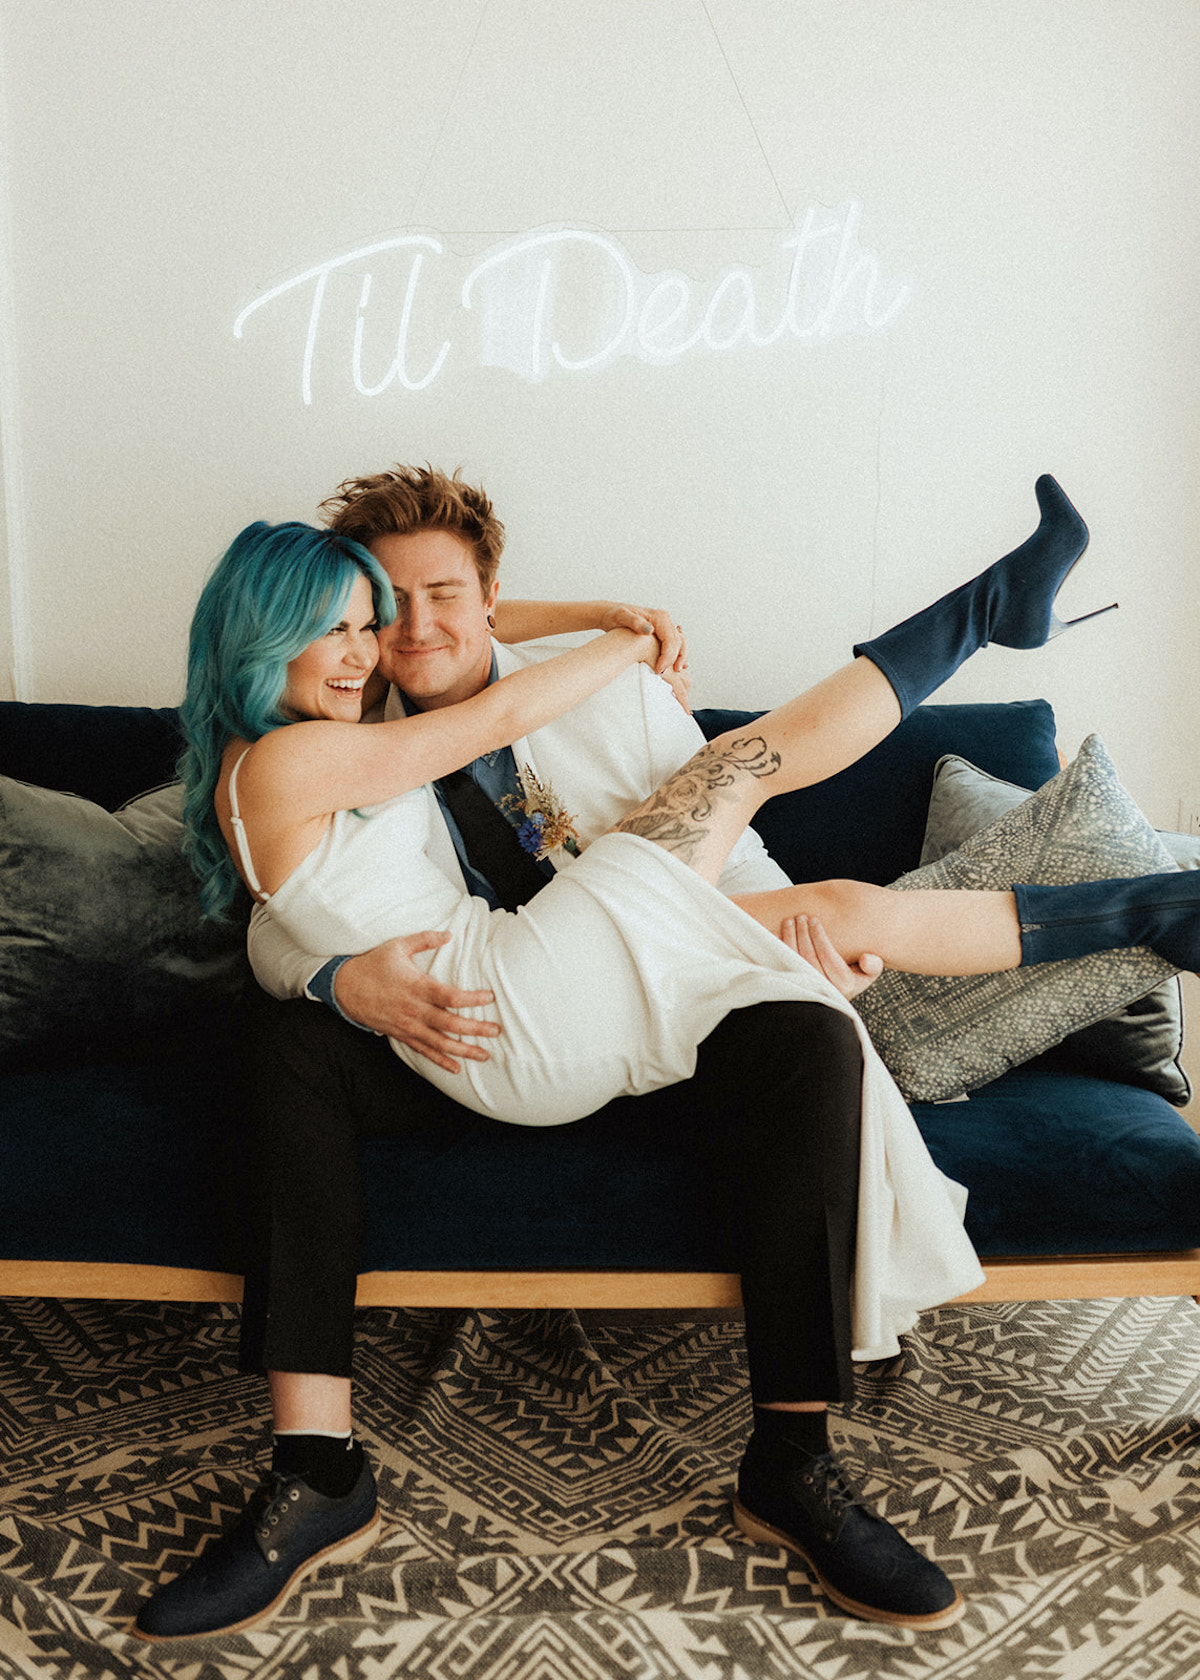 This Styled Shoot Was Inspired by Britney & JT's Iconic Denim-On-Denim Look